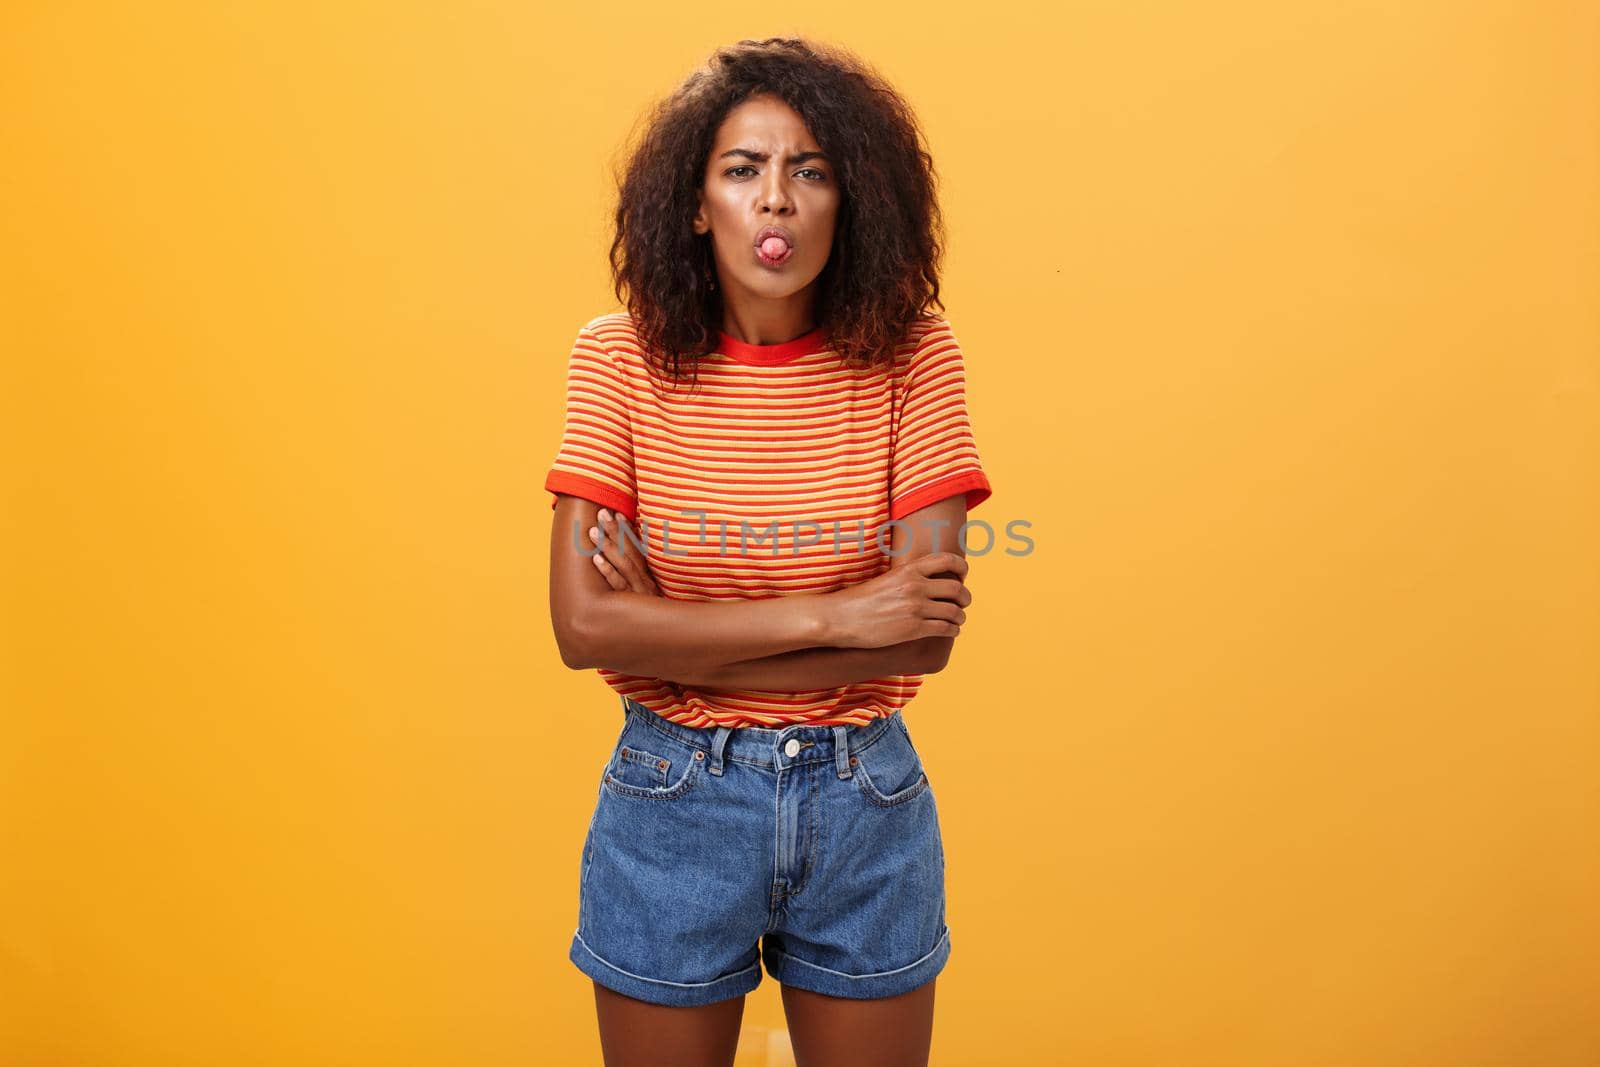 Immature girl showing bad side of character. Portrait of childish offended or displeased young African-American woman with curly hair showing tongue crossing arms on chest over orange background.